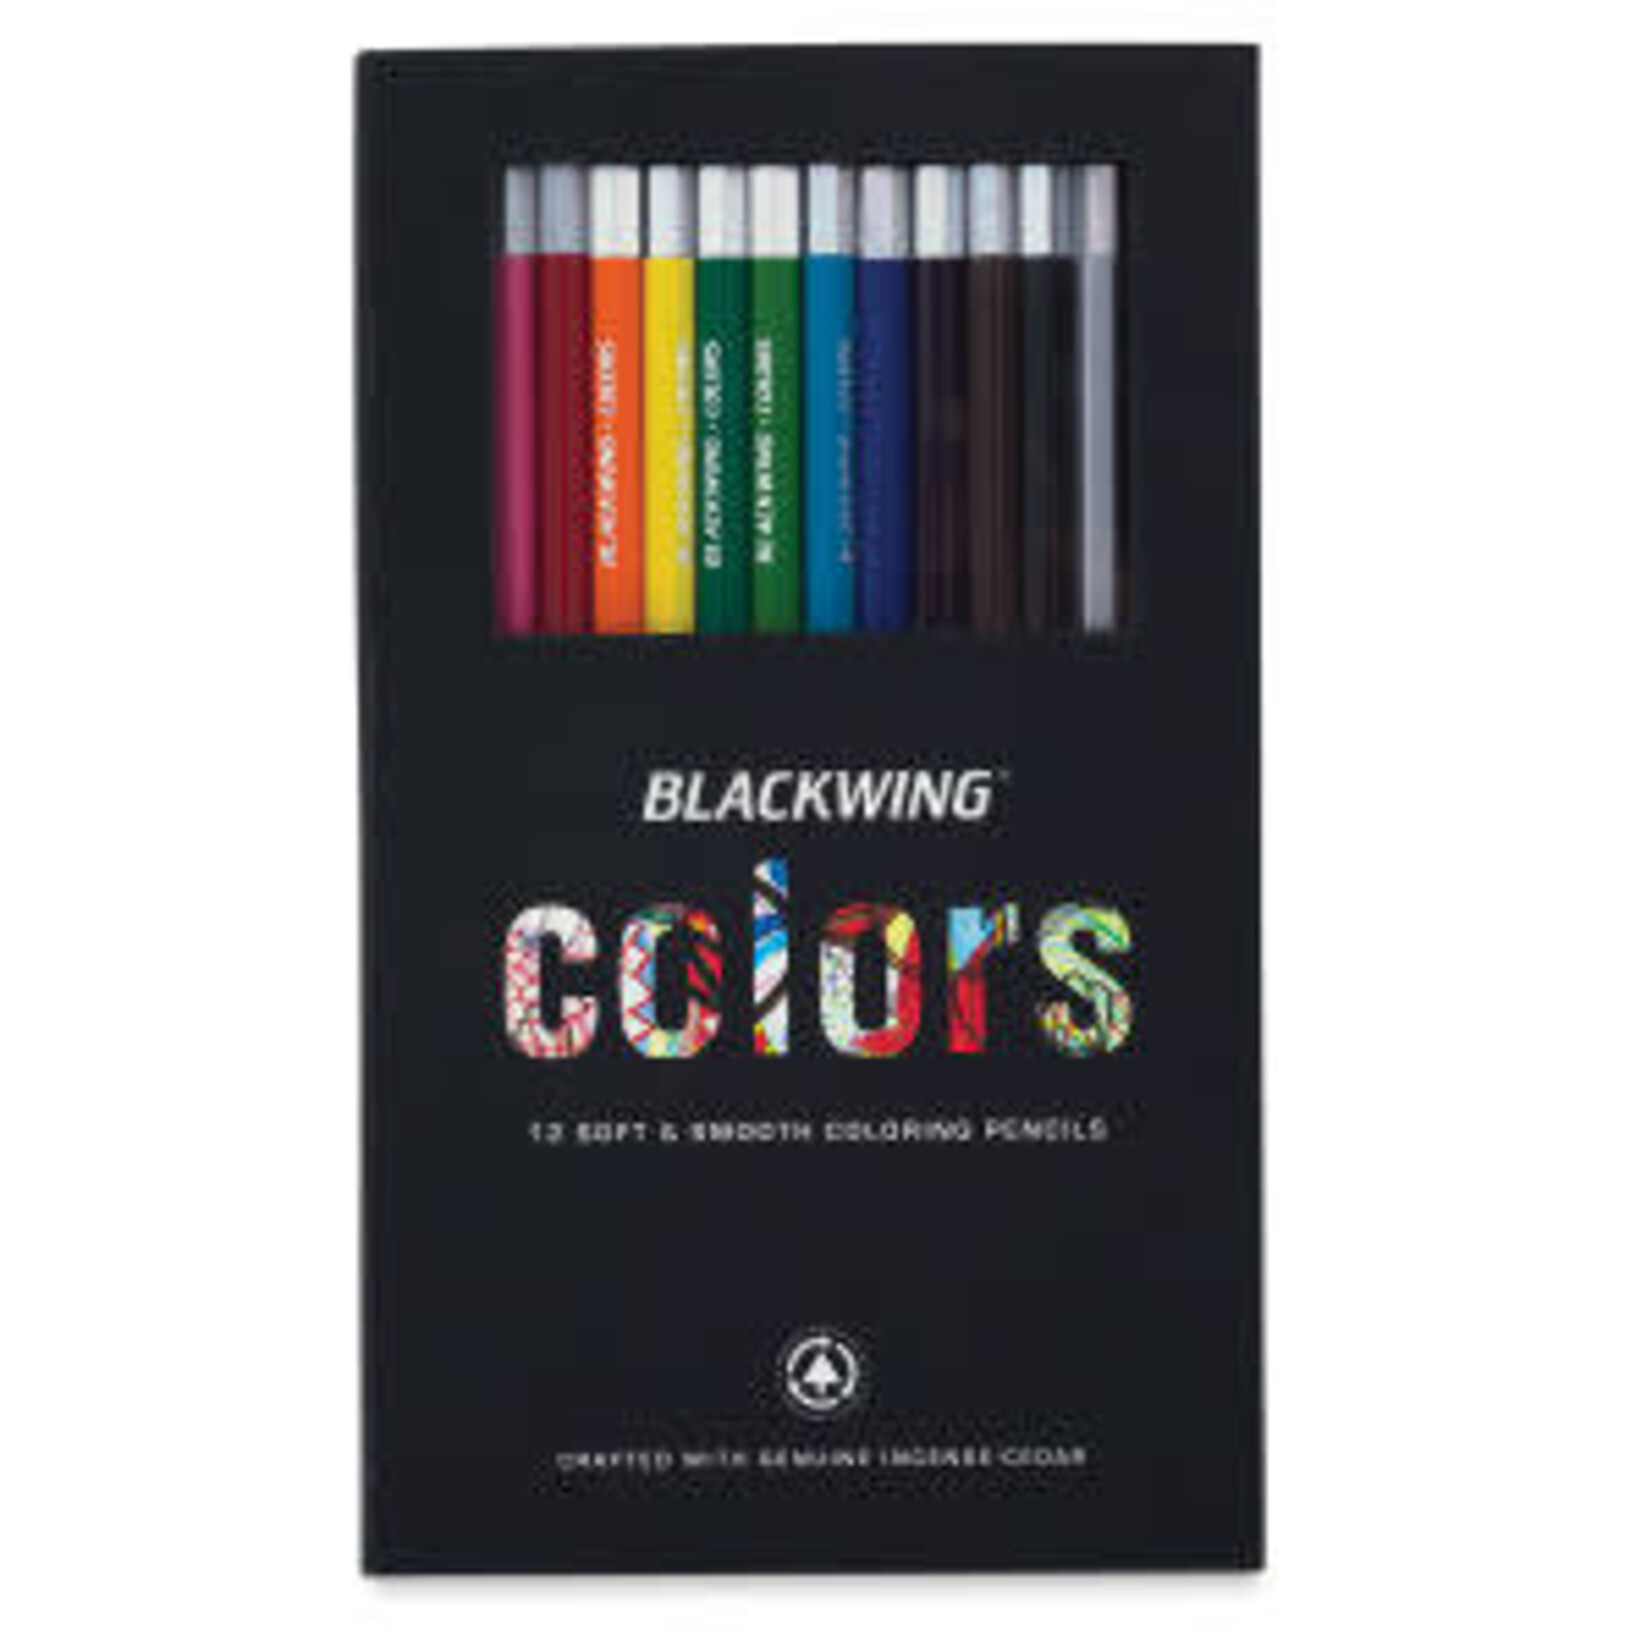 Blackwing Blackwing Colored Pencils